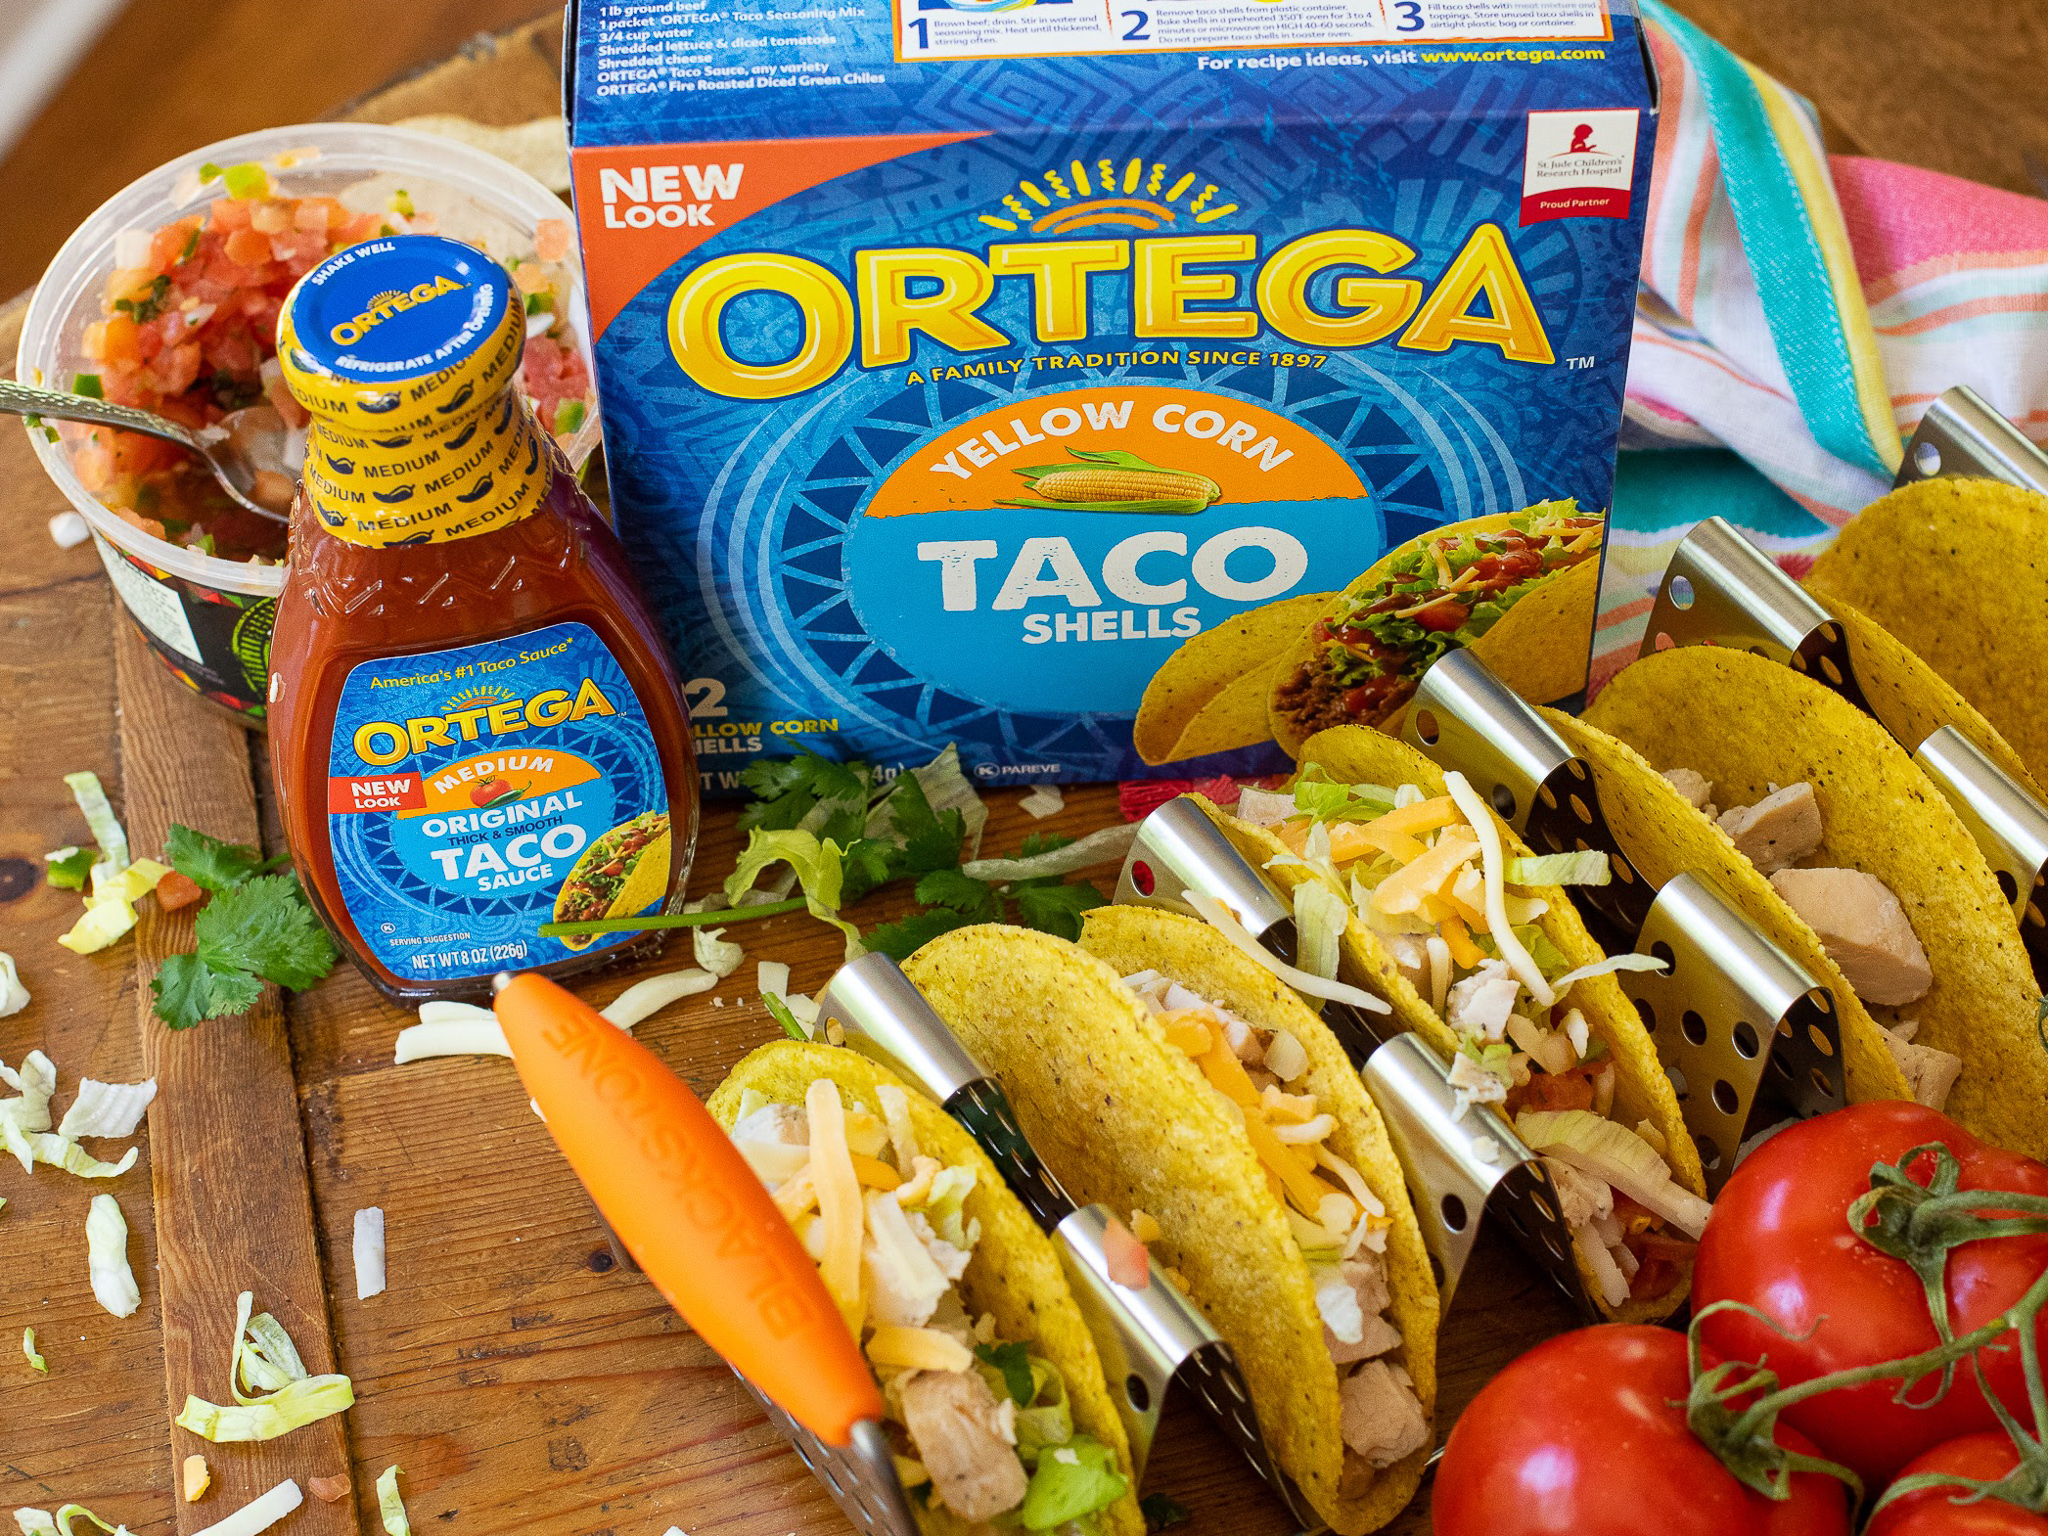 Ortega Taco Shells or Sauce Only $1.50 At Publix – Stock Up For Taco Tuesday!